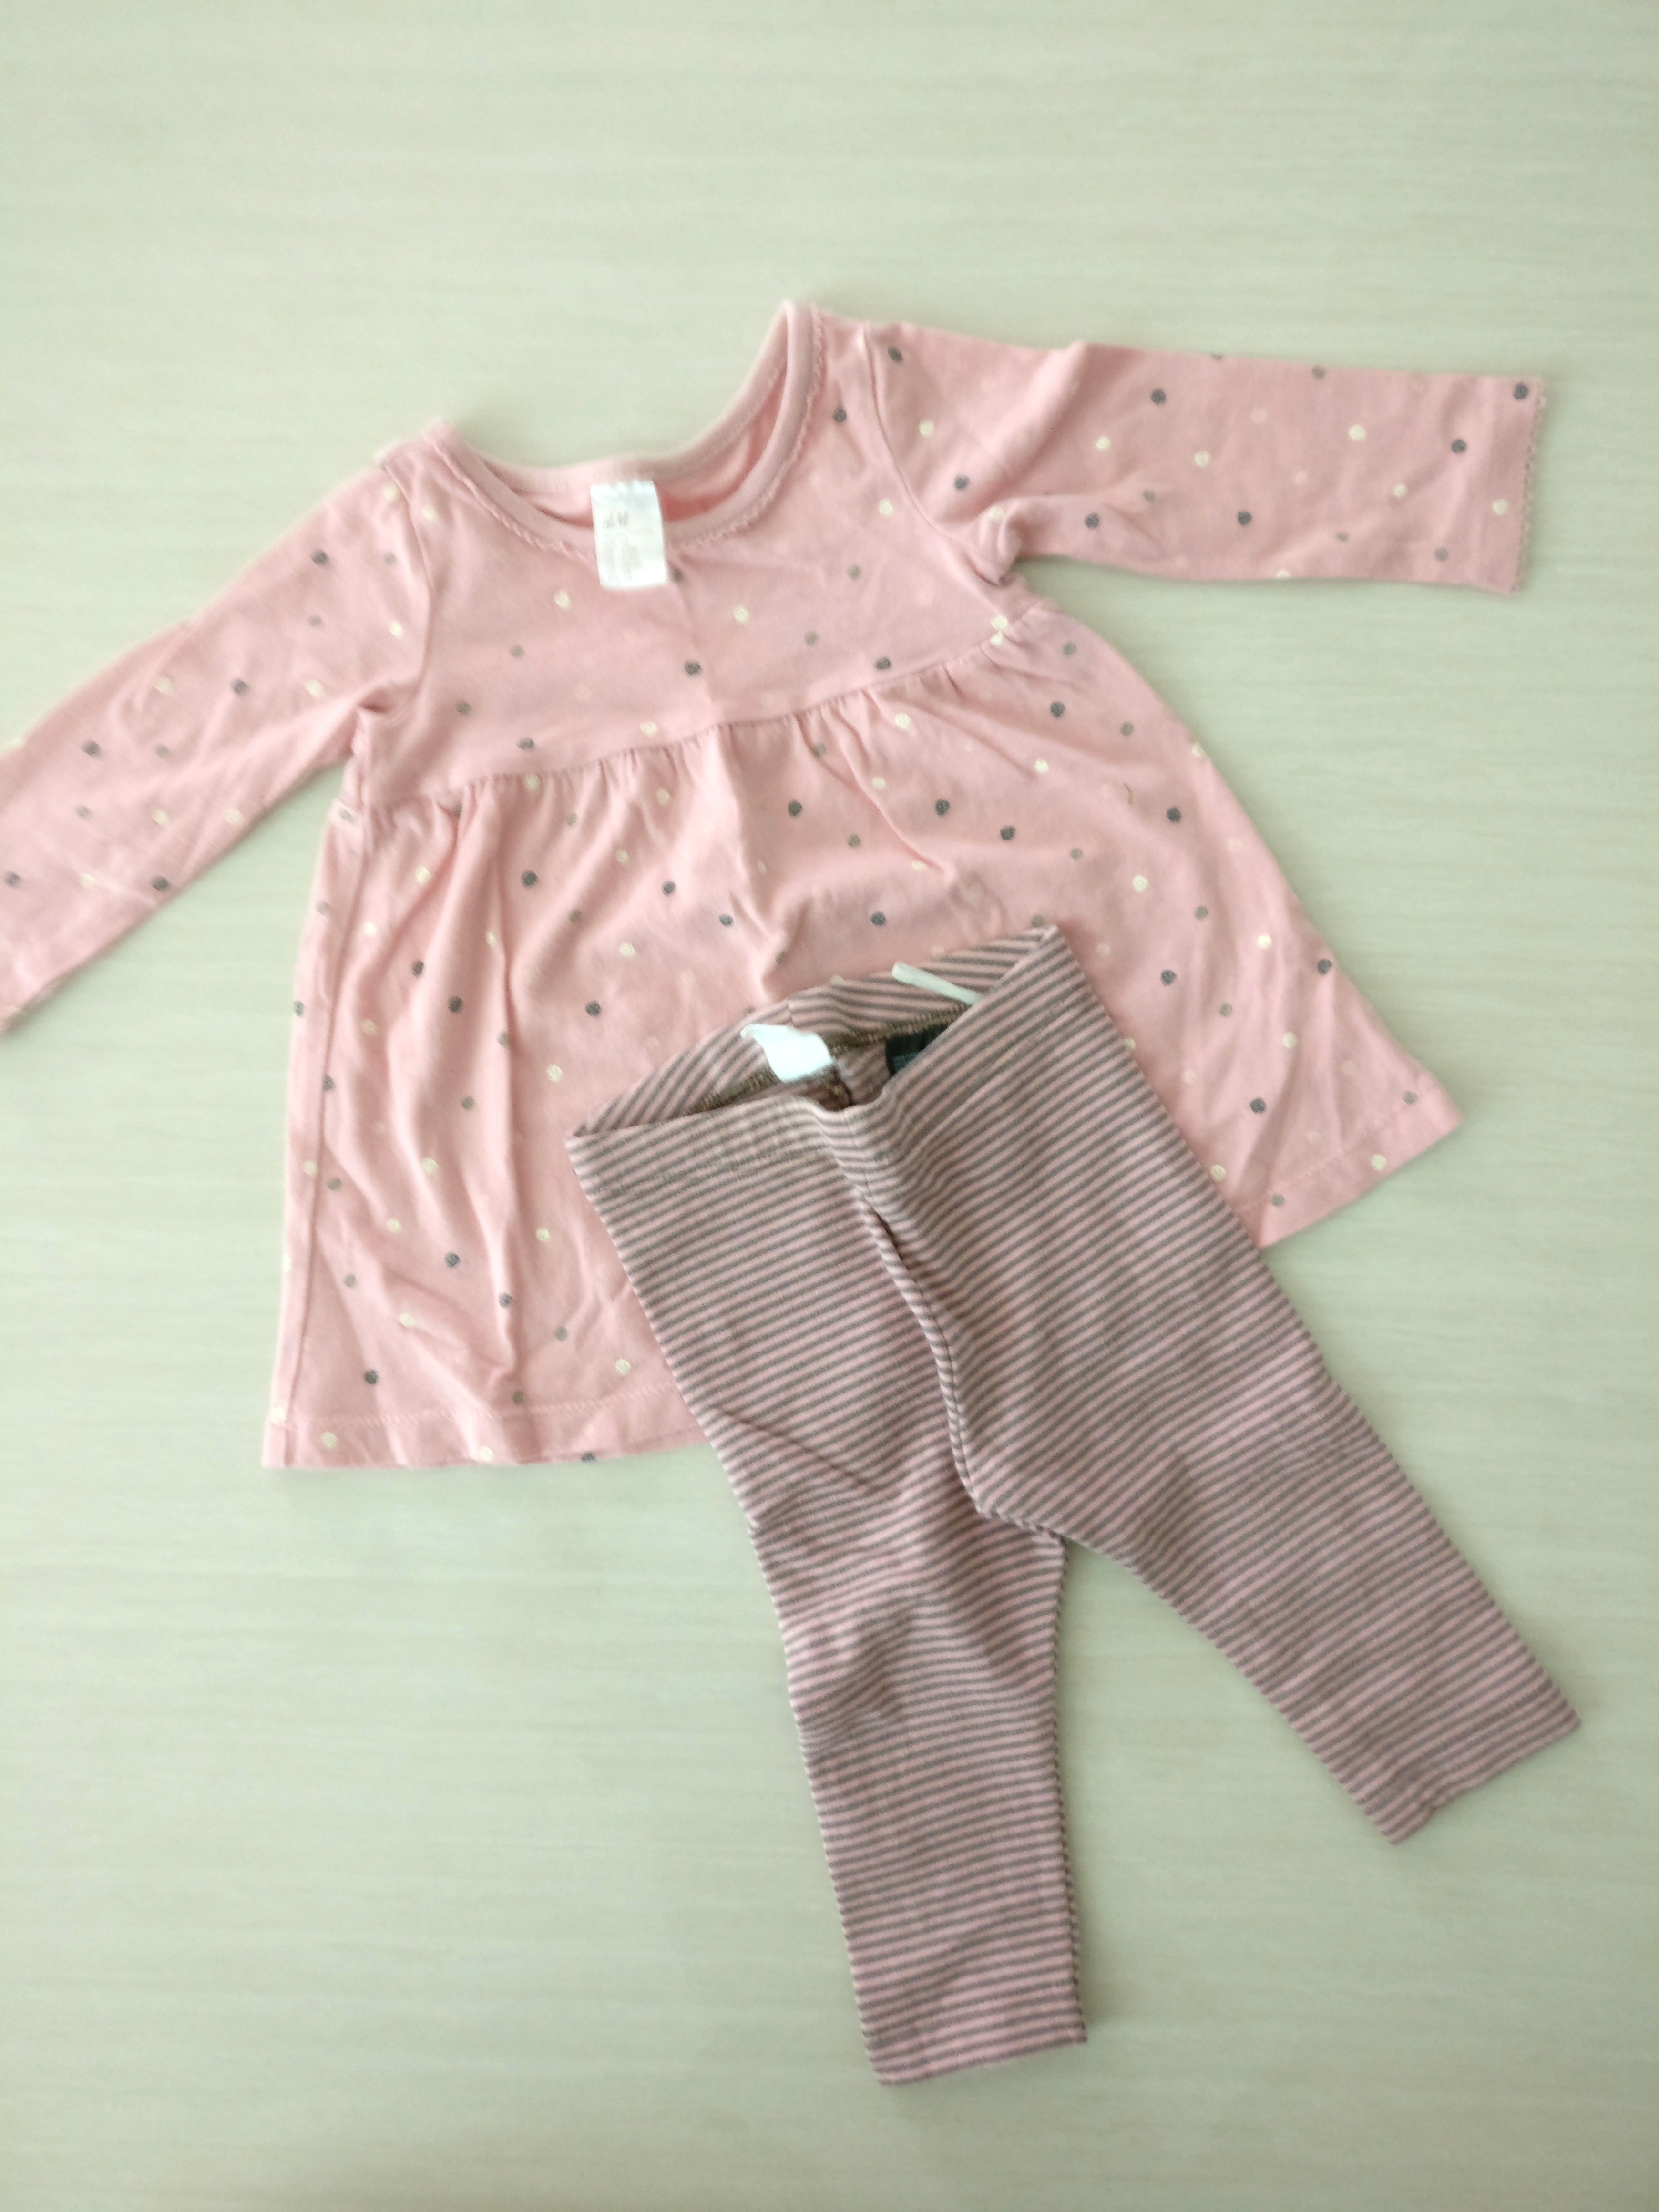 h & m baby girl clothes